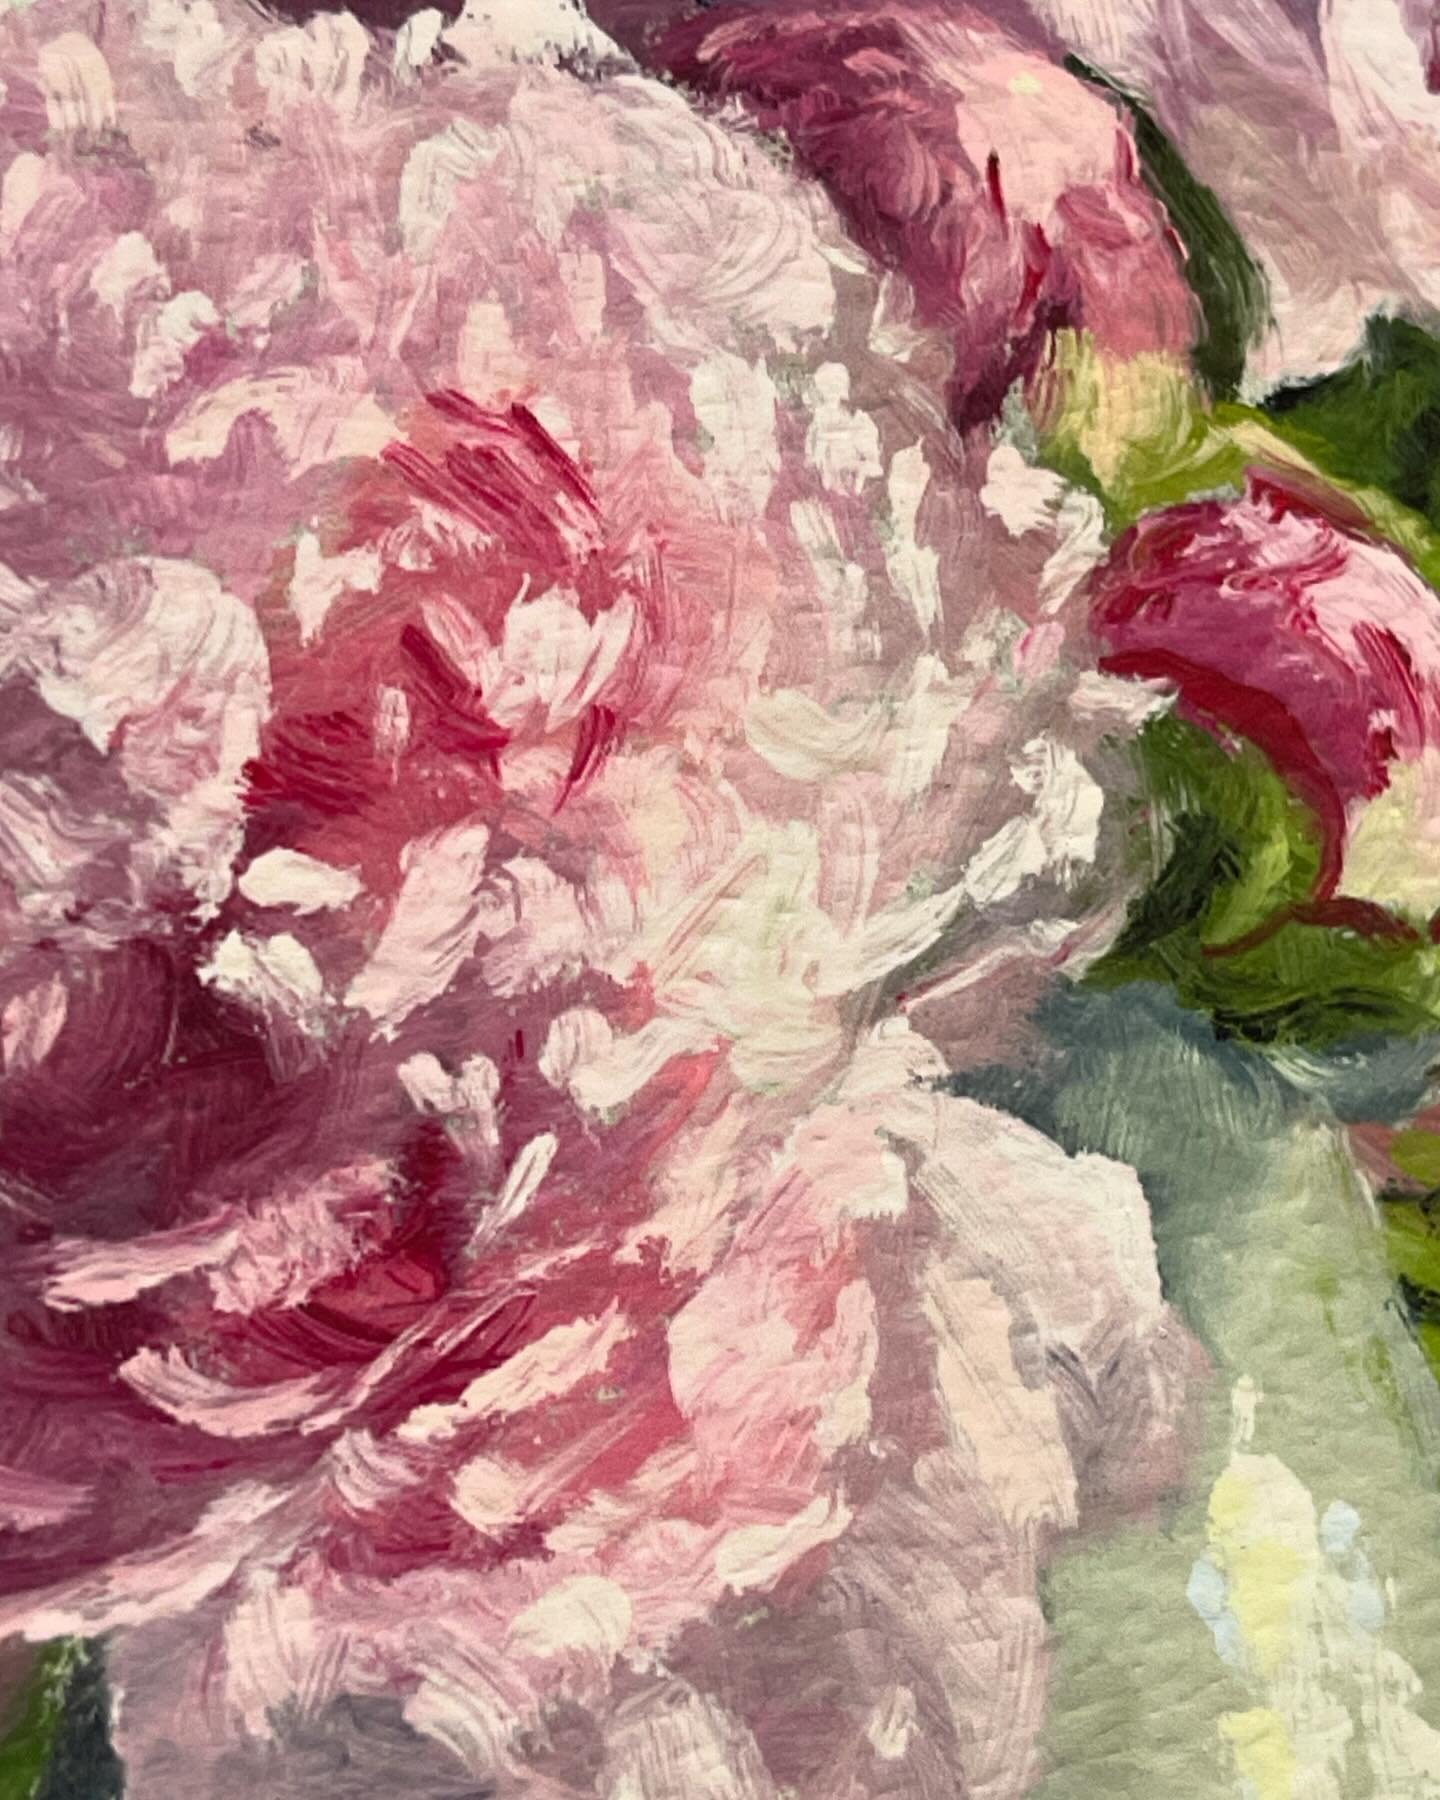 Detail from my limited edition print for May, featuring a detail of Peonies. The juicy brushstrokes, please! Available at the link in profile if you&rsquo;d like. ⁠
⁠
#elizabethfloydart #peonypainting